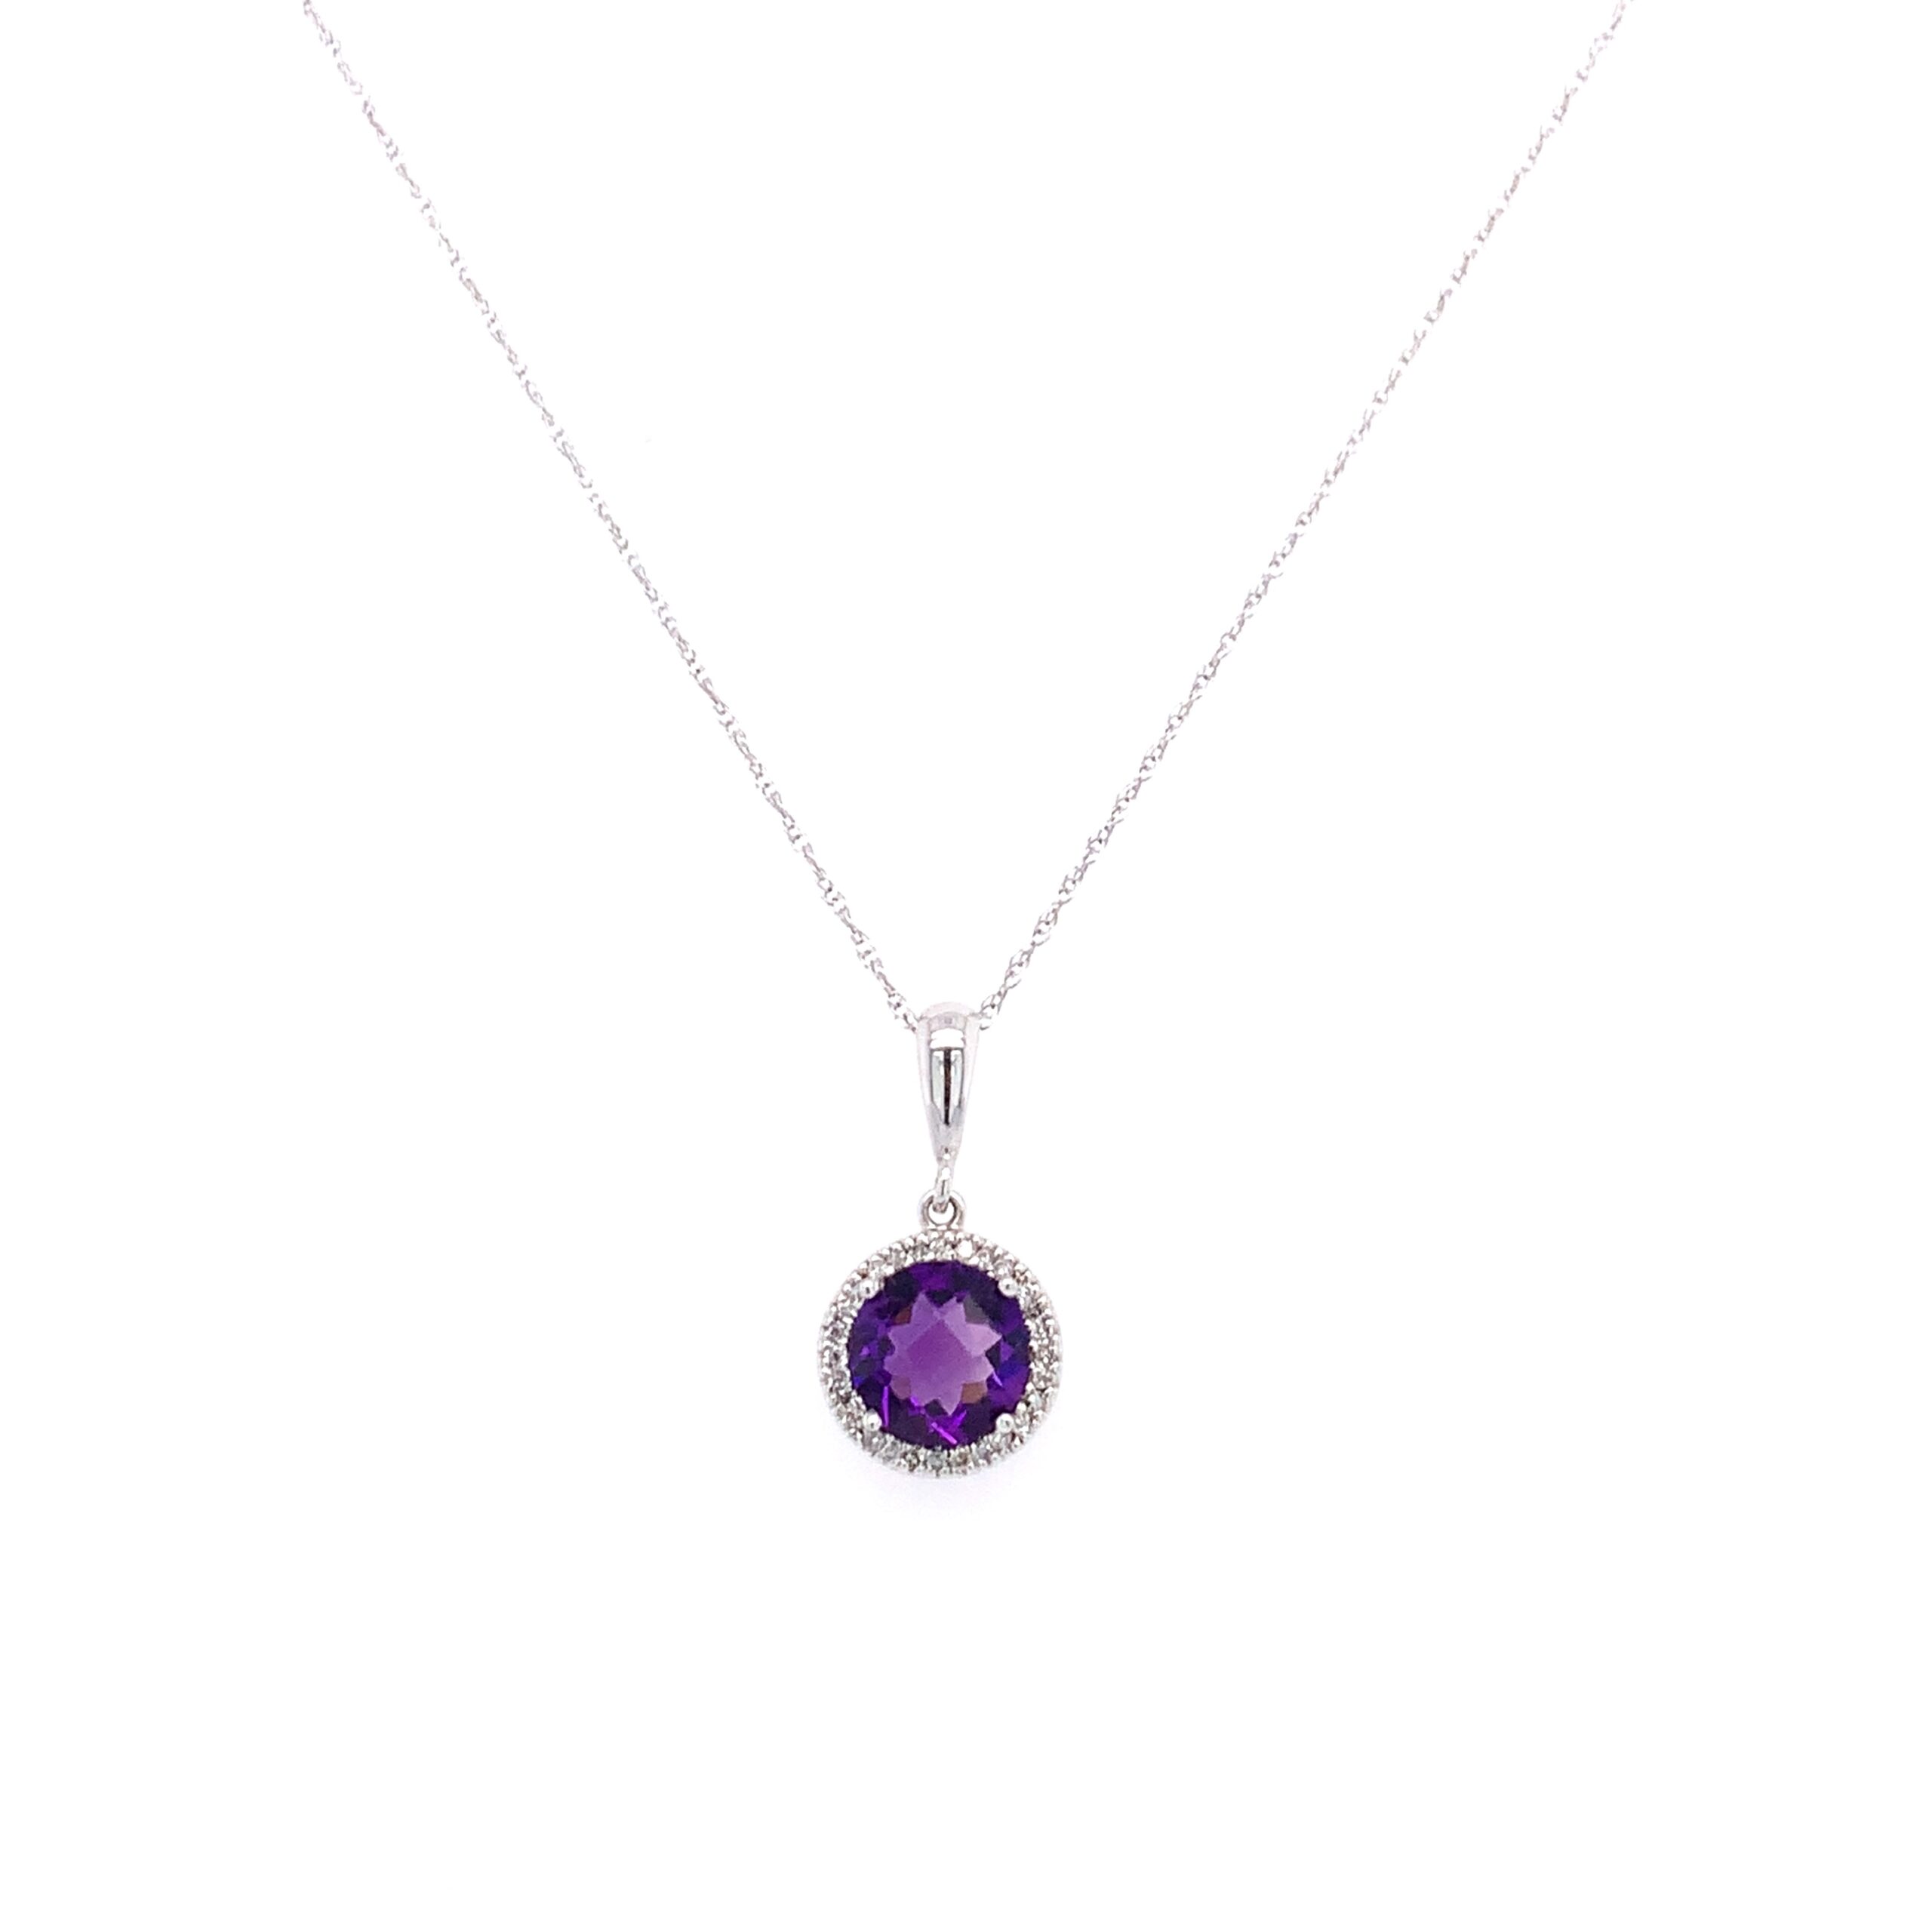 White Gold Amethyst Pendant Necklace